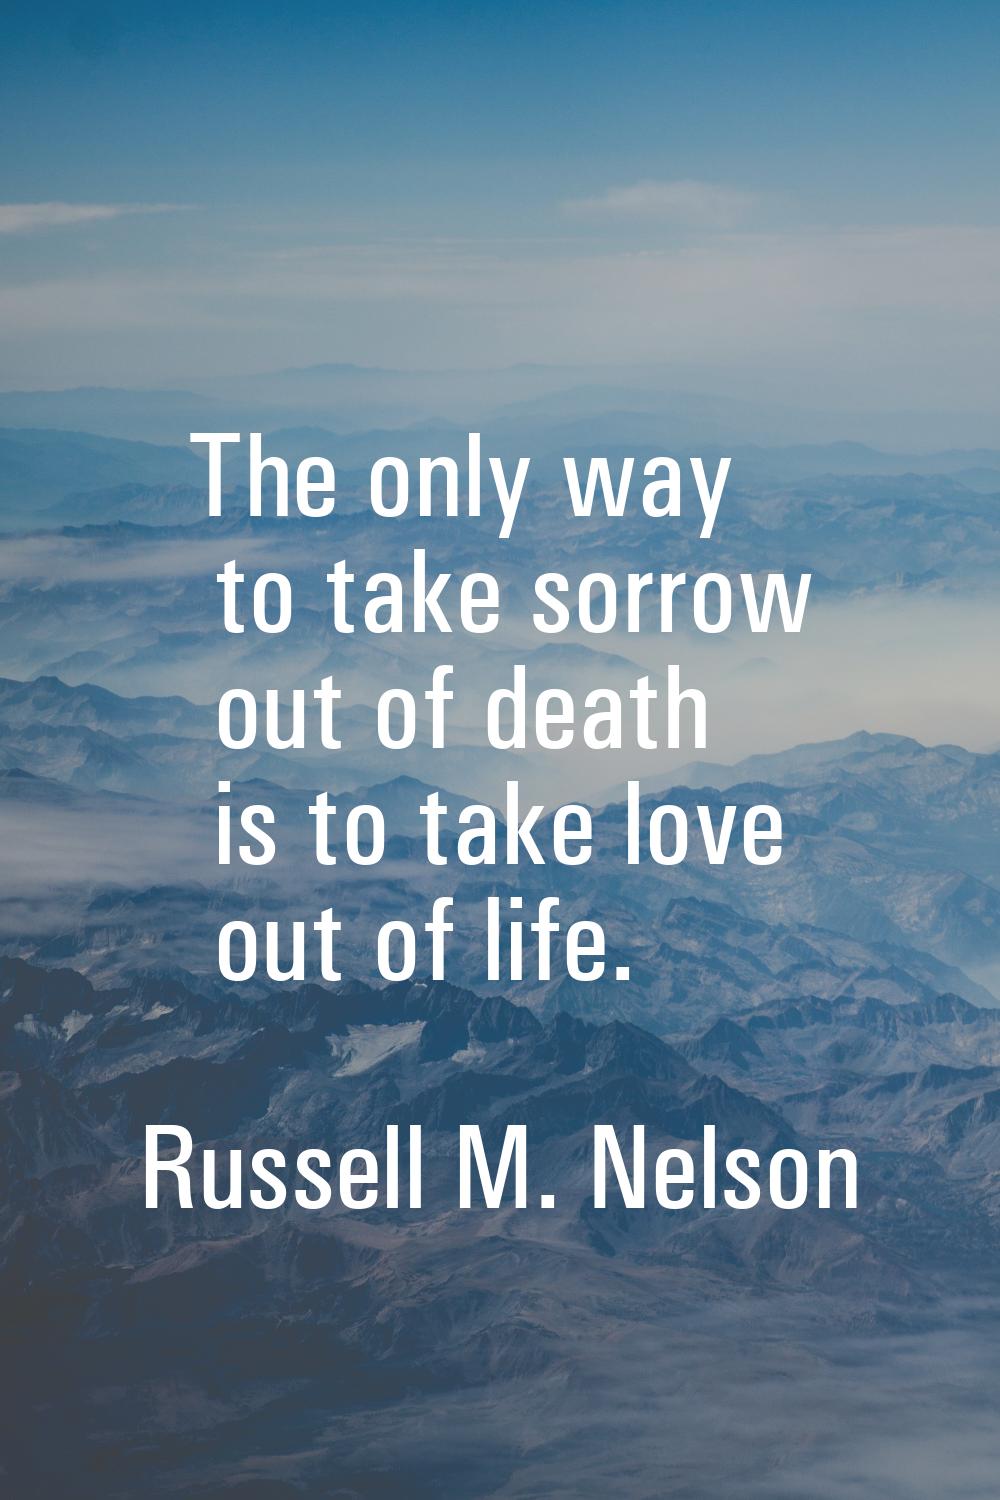 The only way to take sorrow out of death is to take love out of life.